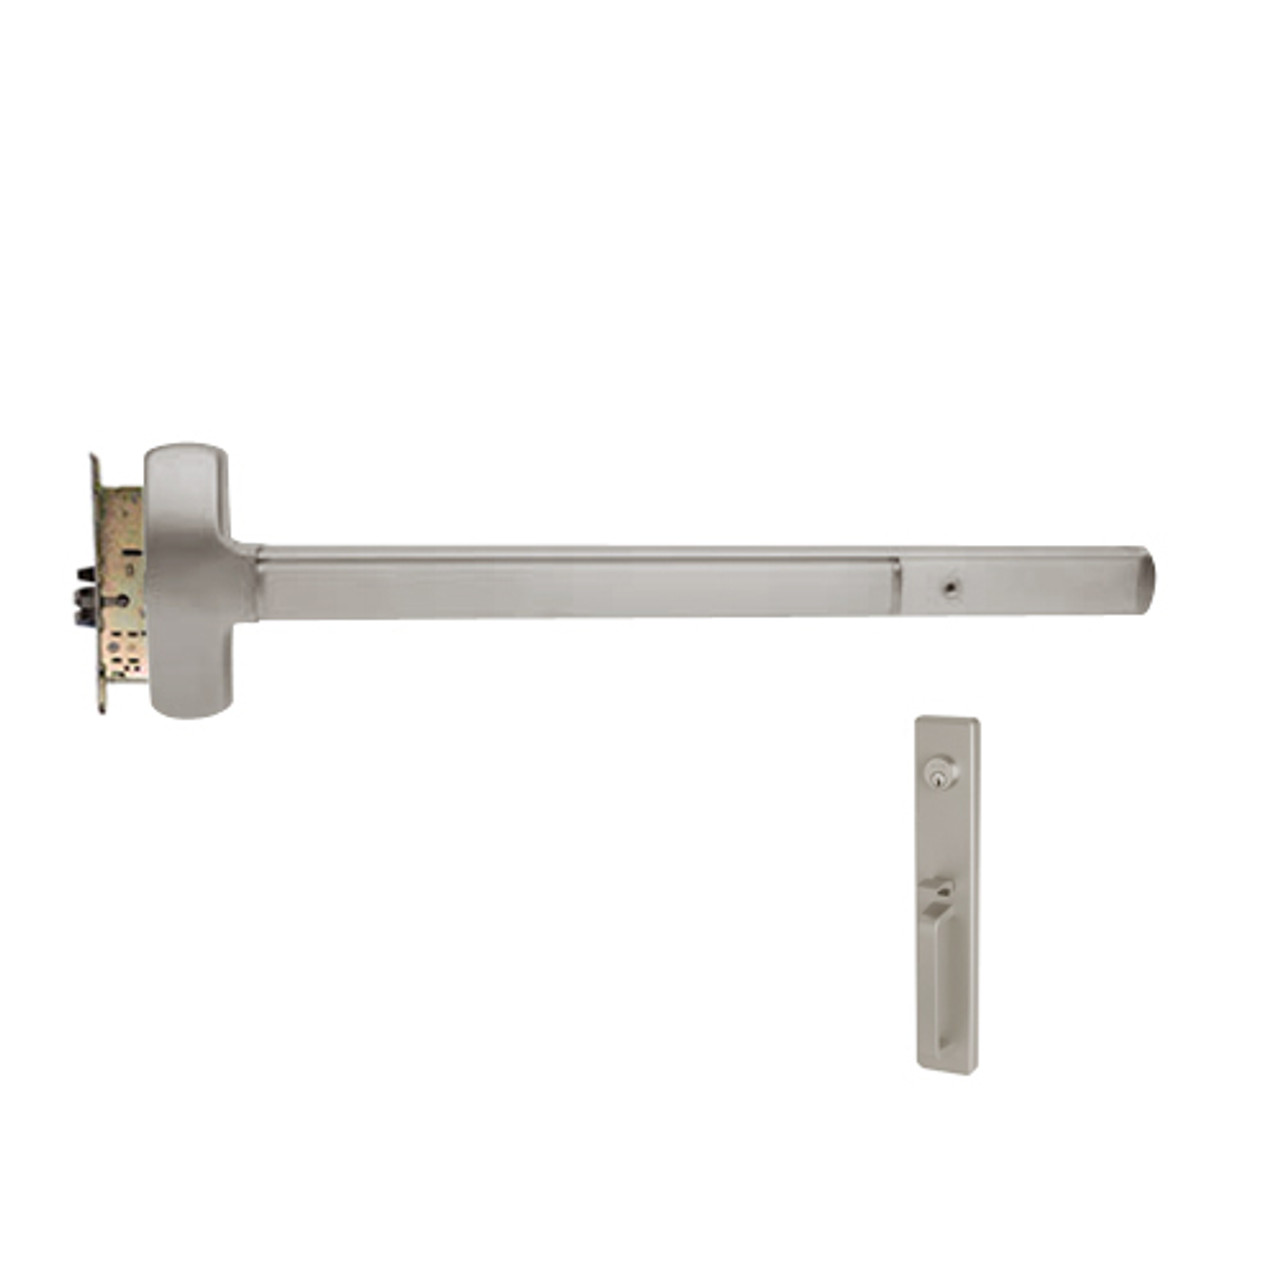 25-M-TP-US32D-4-RHR Falcon Exit Device in Satin Stainless Steel